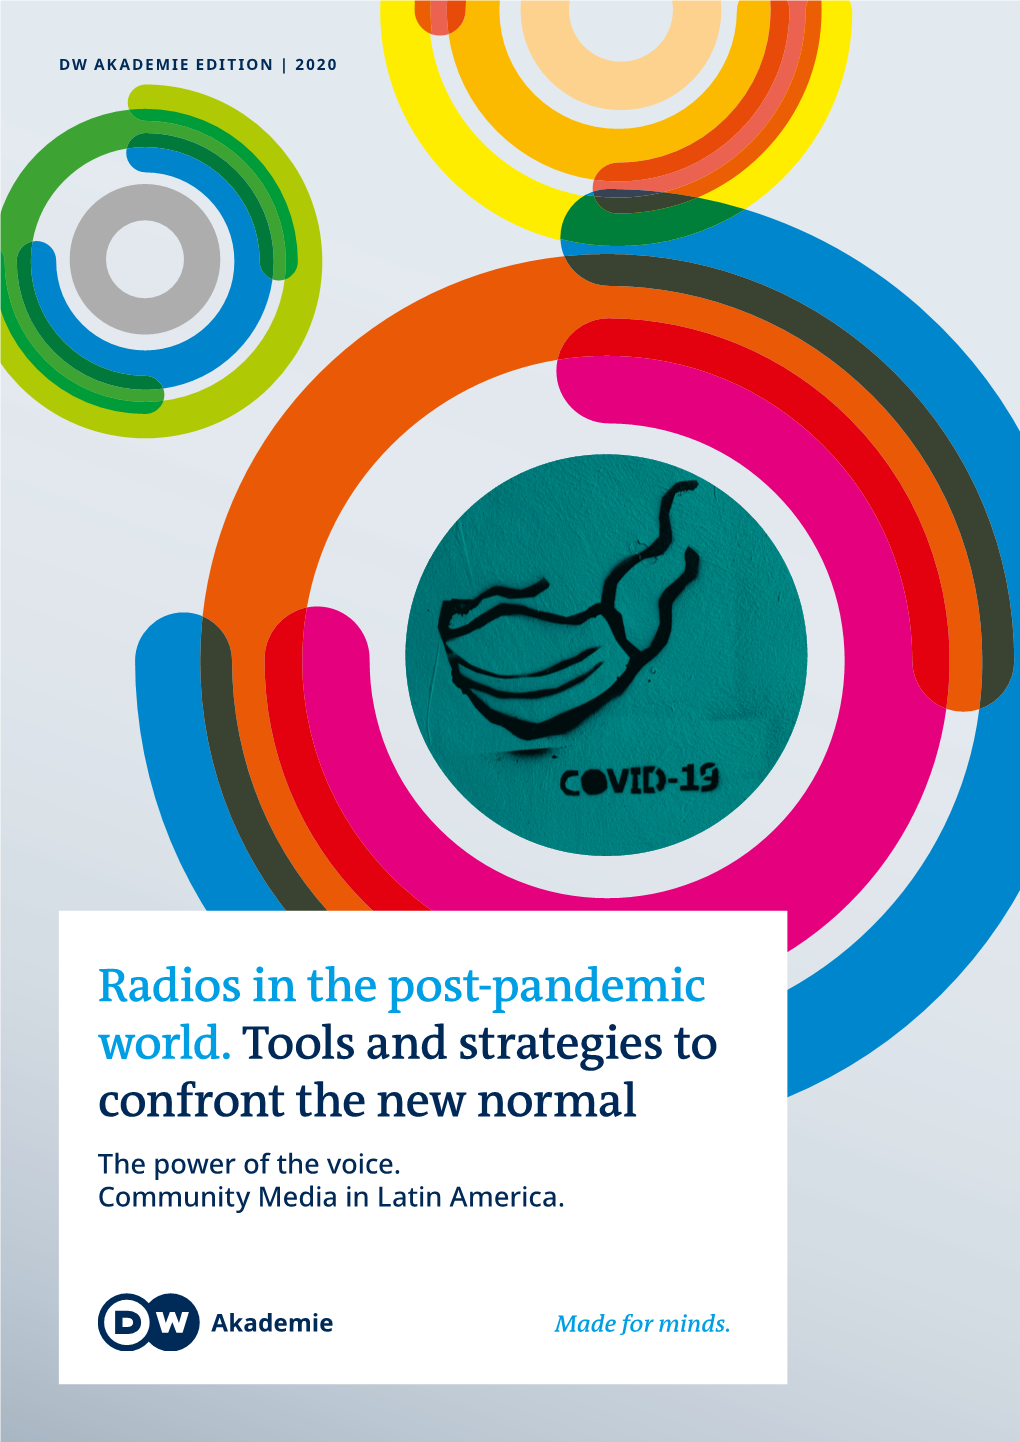 Radios in the Post-Pandemic World. Tools and Strategies to Confront the New Normal the Power of the Voice